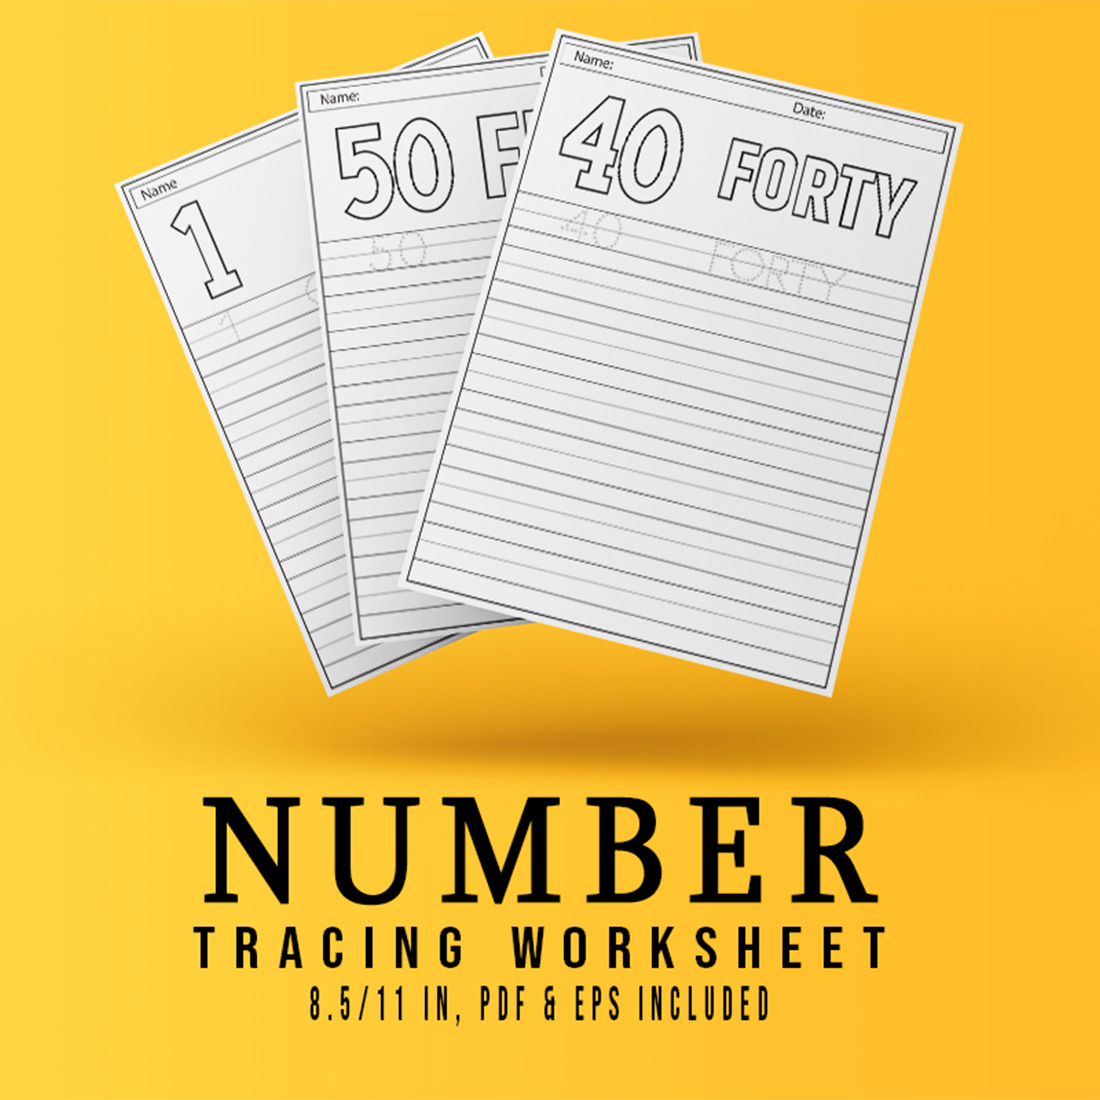 Tracing Numbers Worksheets Design cover image.